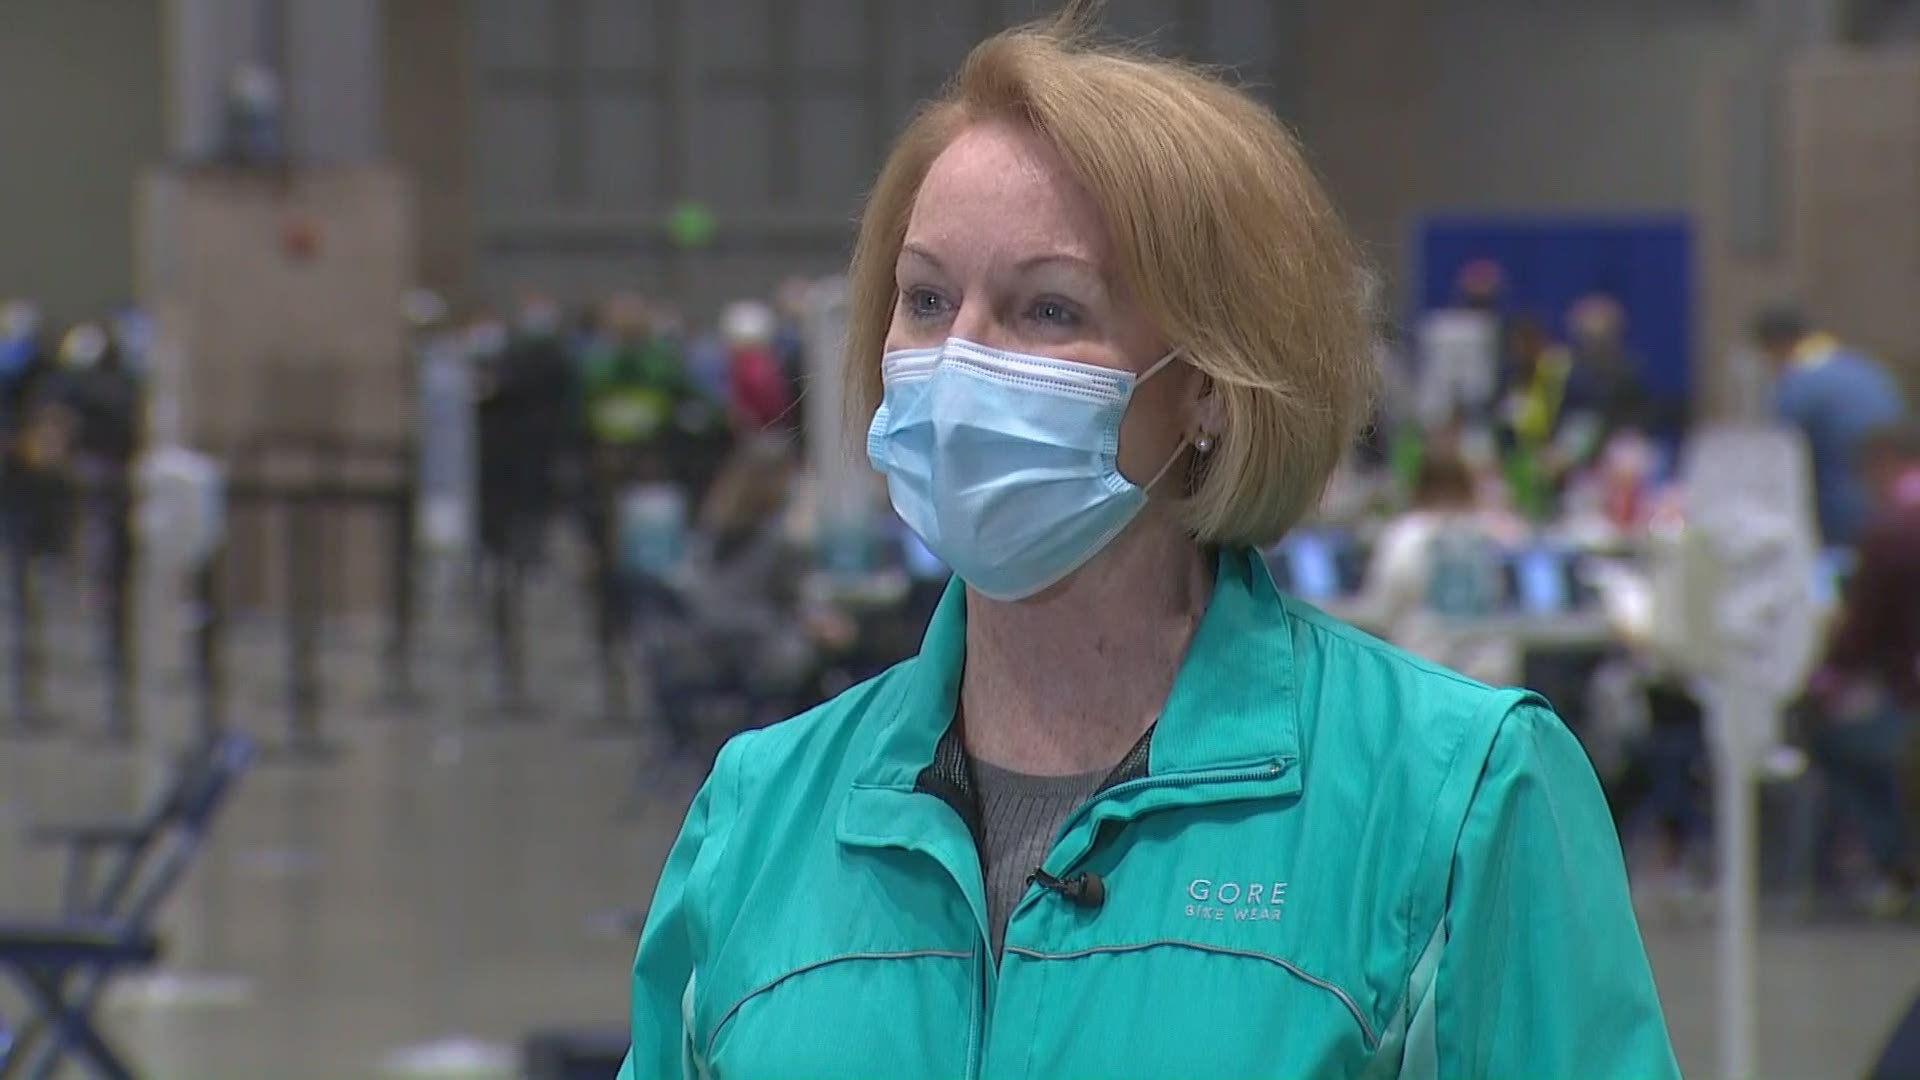 Seattle Mayor Jenny Durkan answered questions from the media Wednesday morning at the community COVID-19 vaccination site at the Lumen Field Event Center.